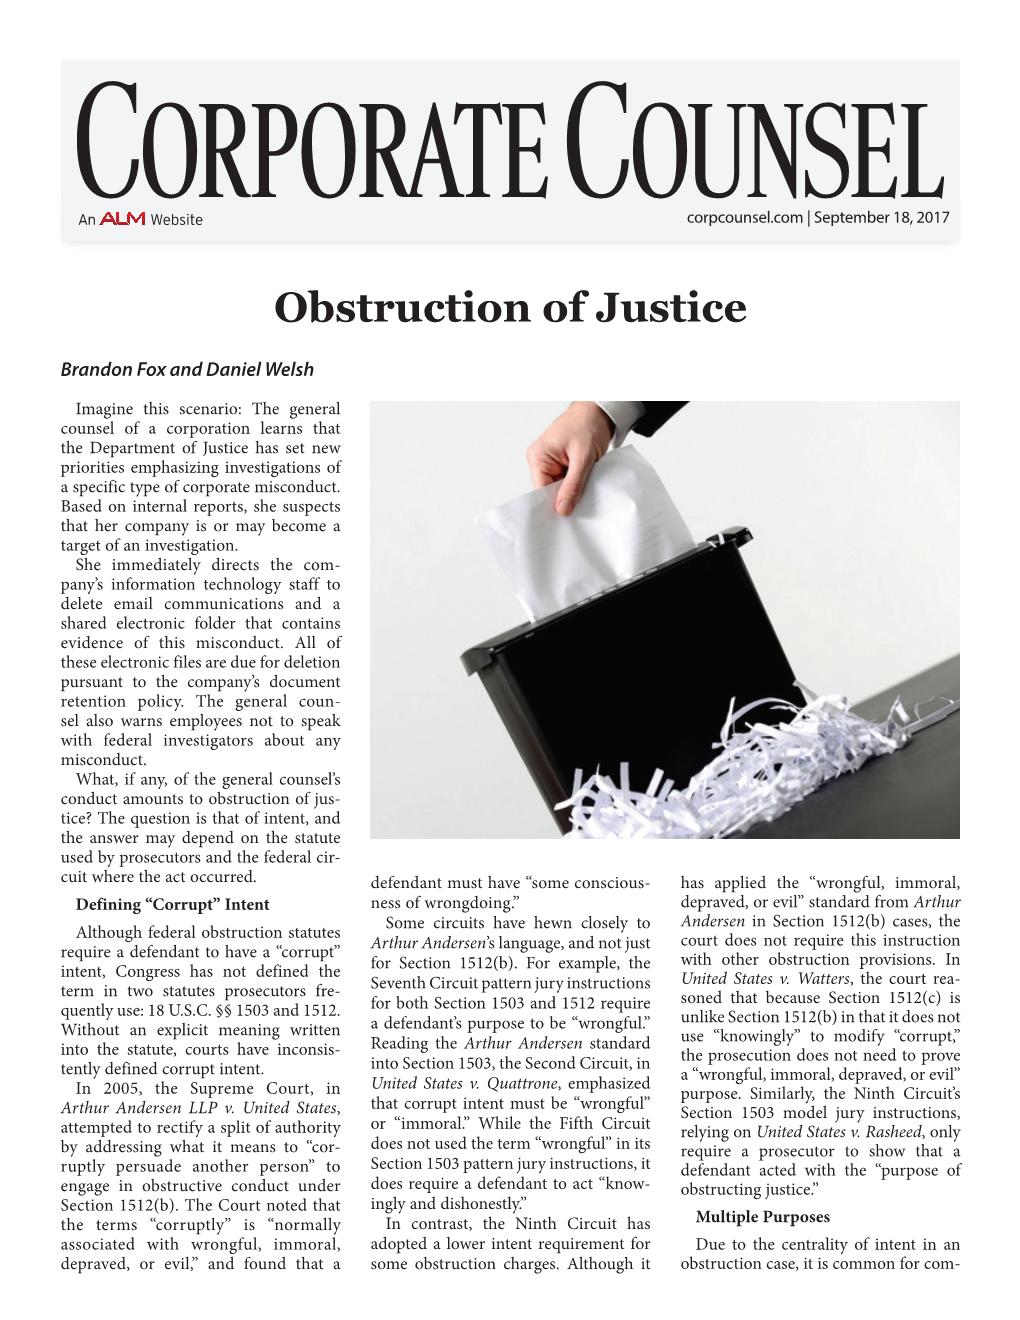 “Obstruction of Justice,” Corporate Counsel